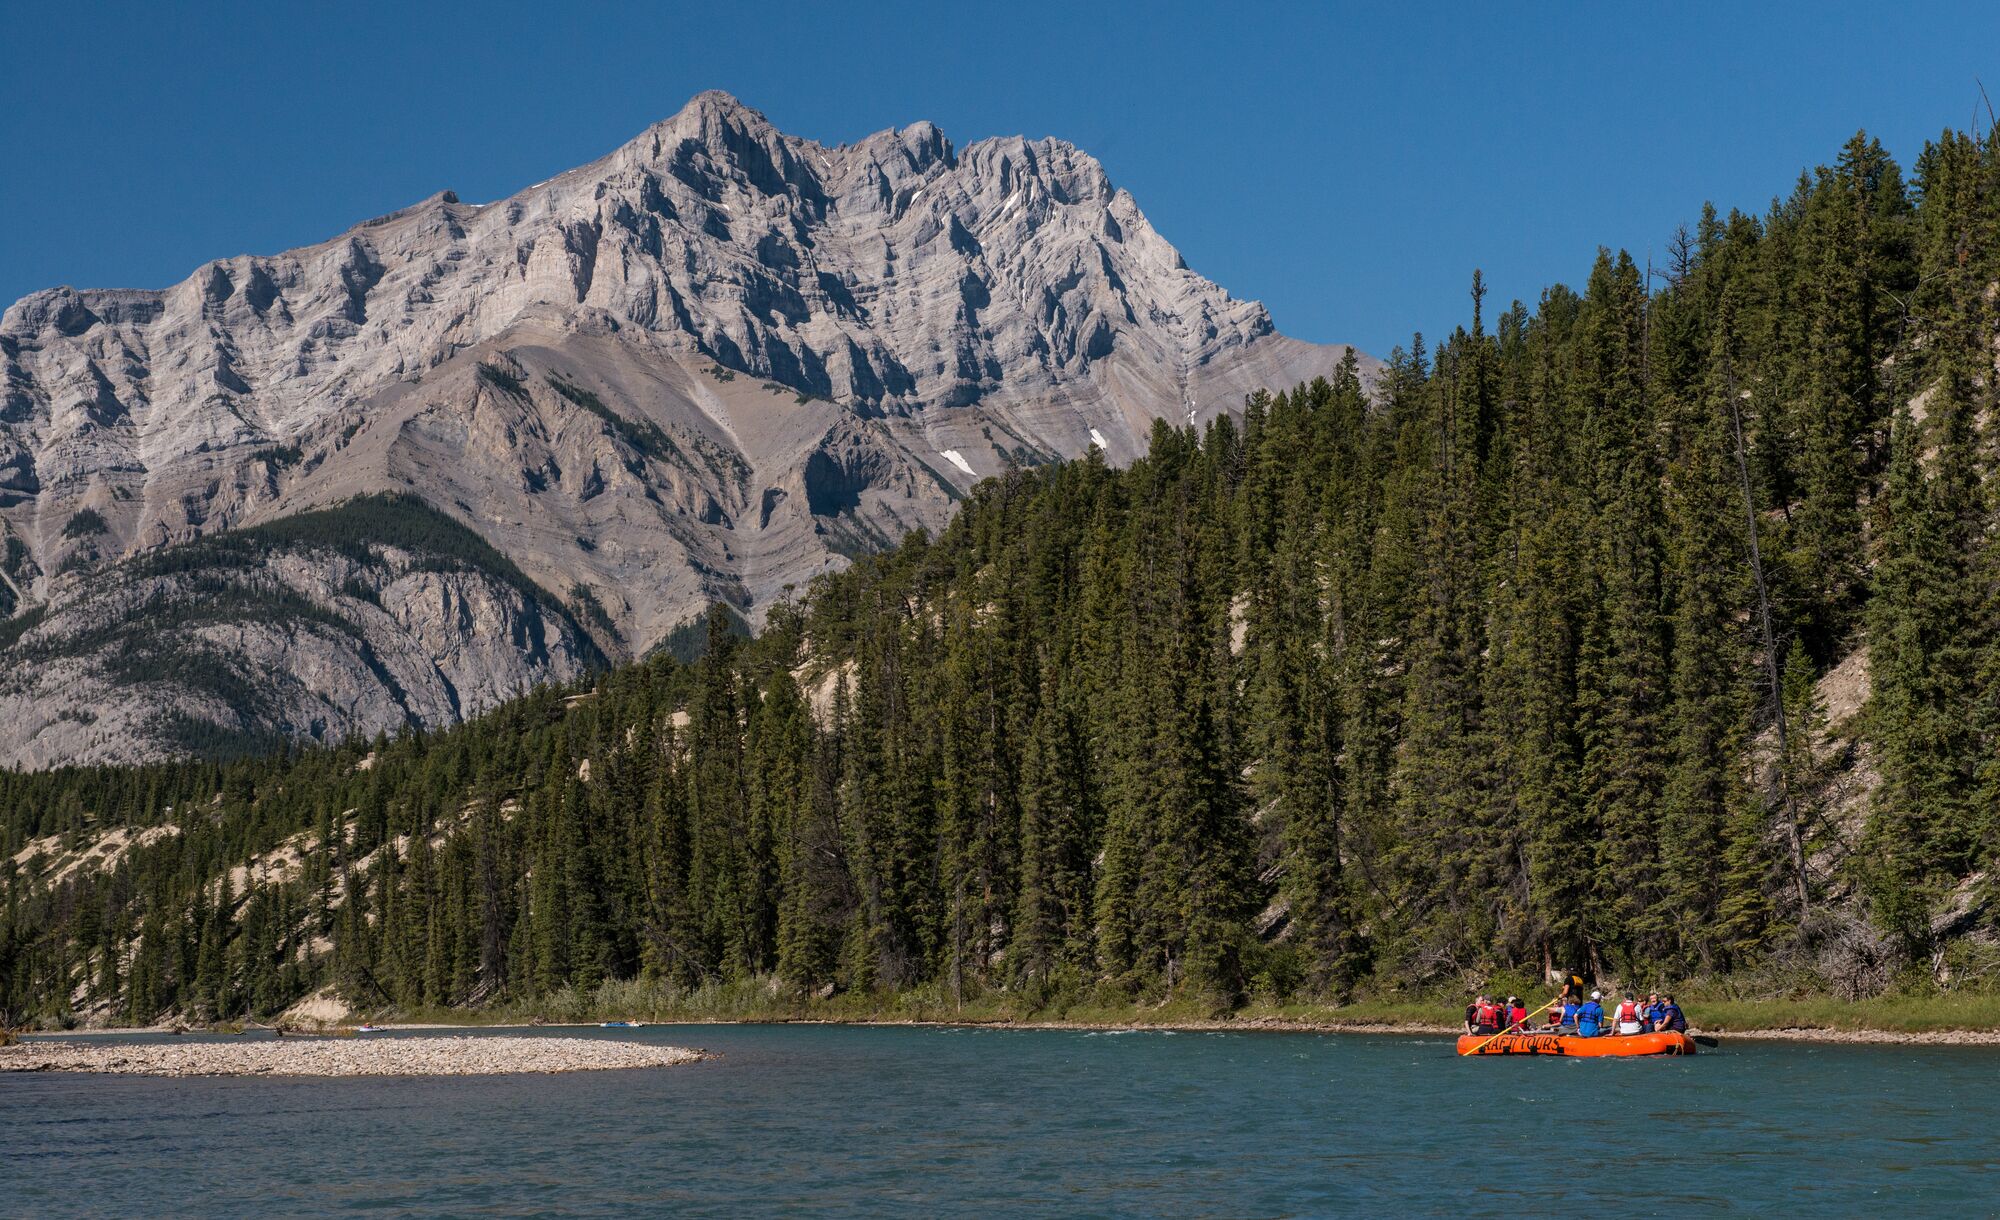 A raft floats on the Bow River in Banff National Park with Cascade Mountain in the background.